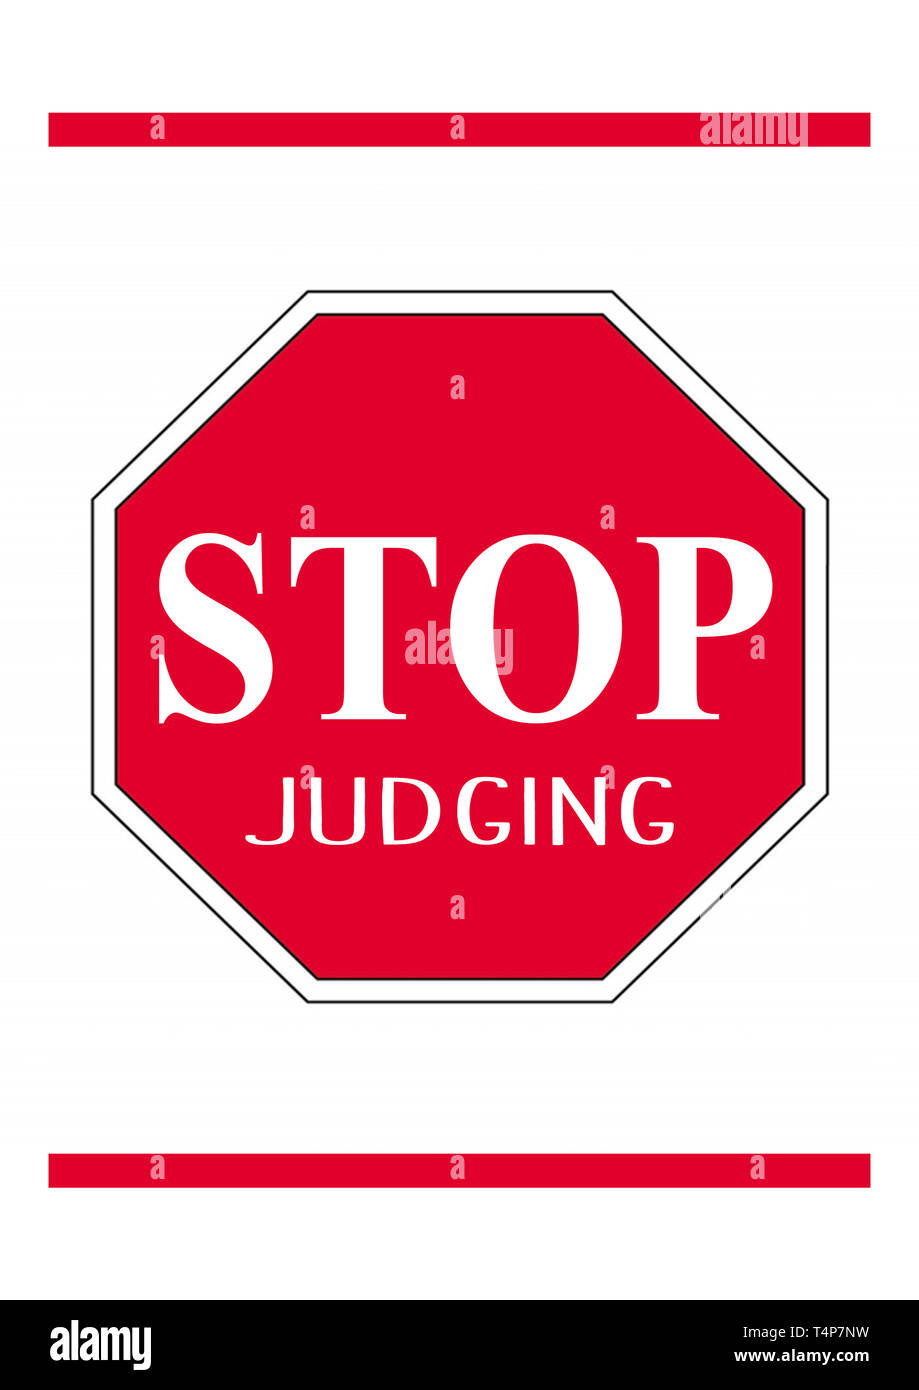 Stop judging sign. Stock Photo